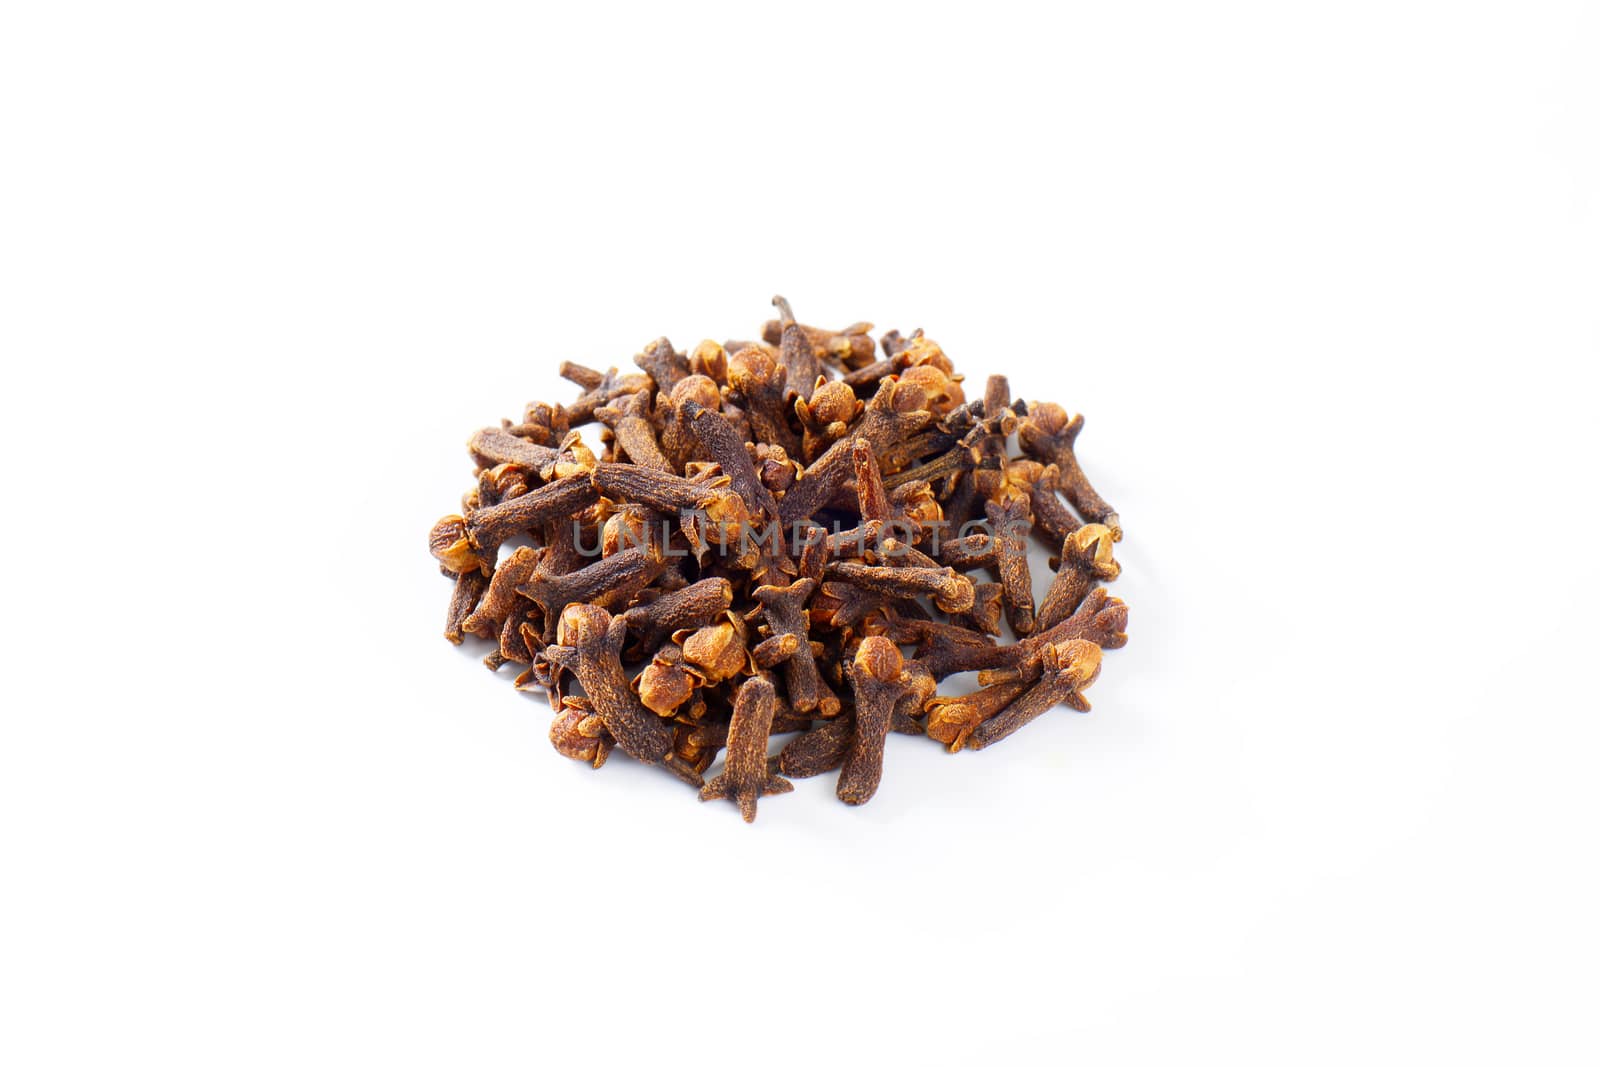 Heap of dried cloves on white background